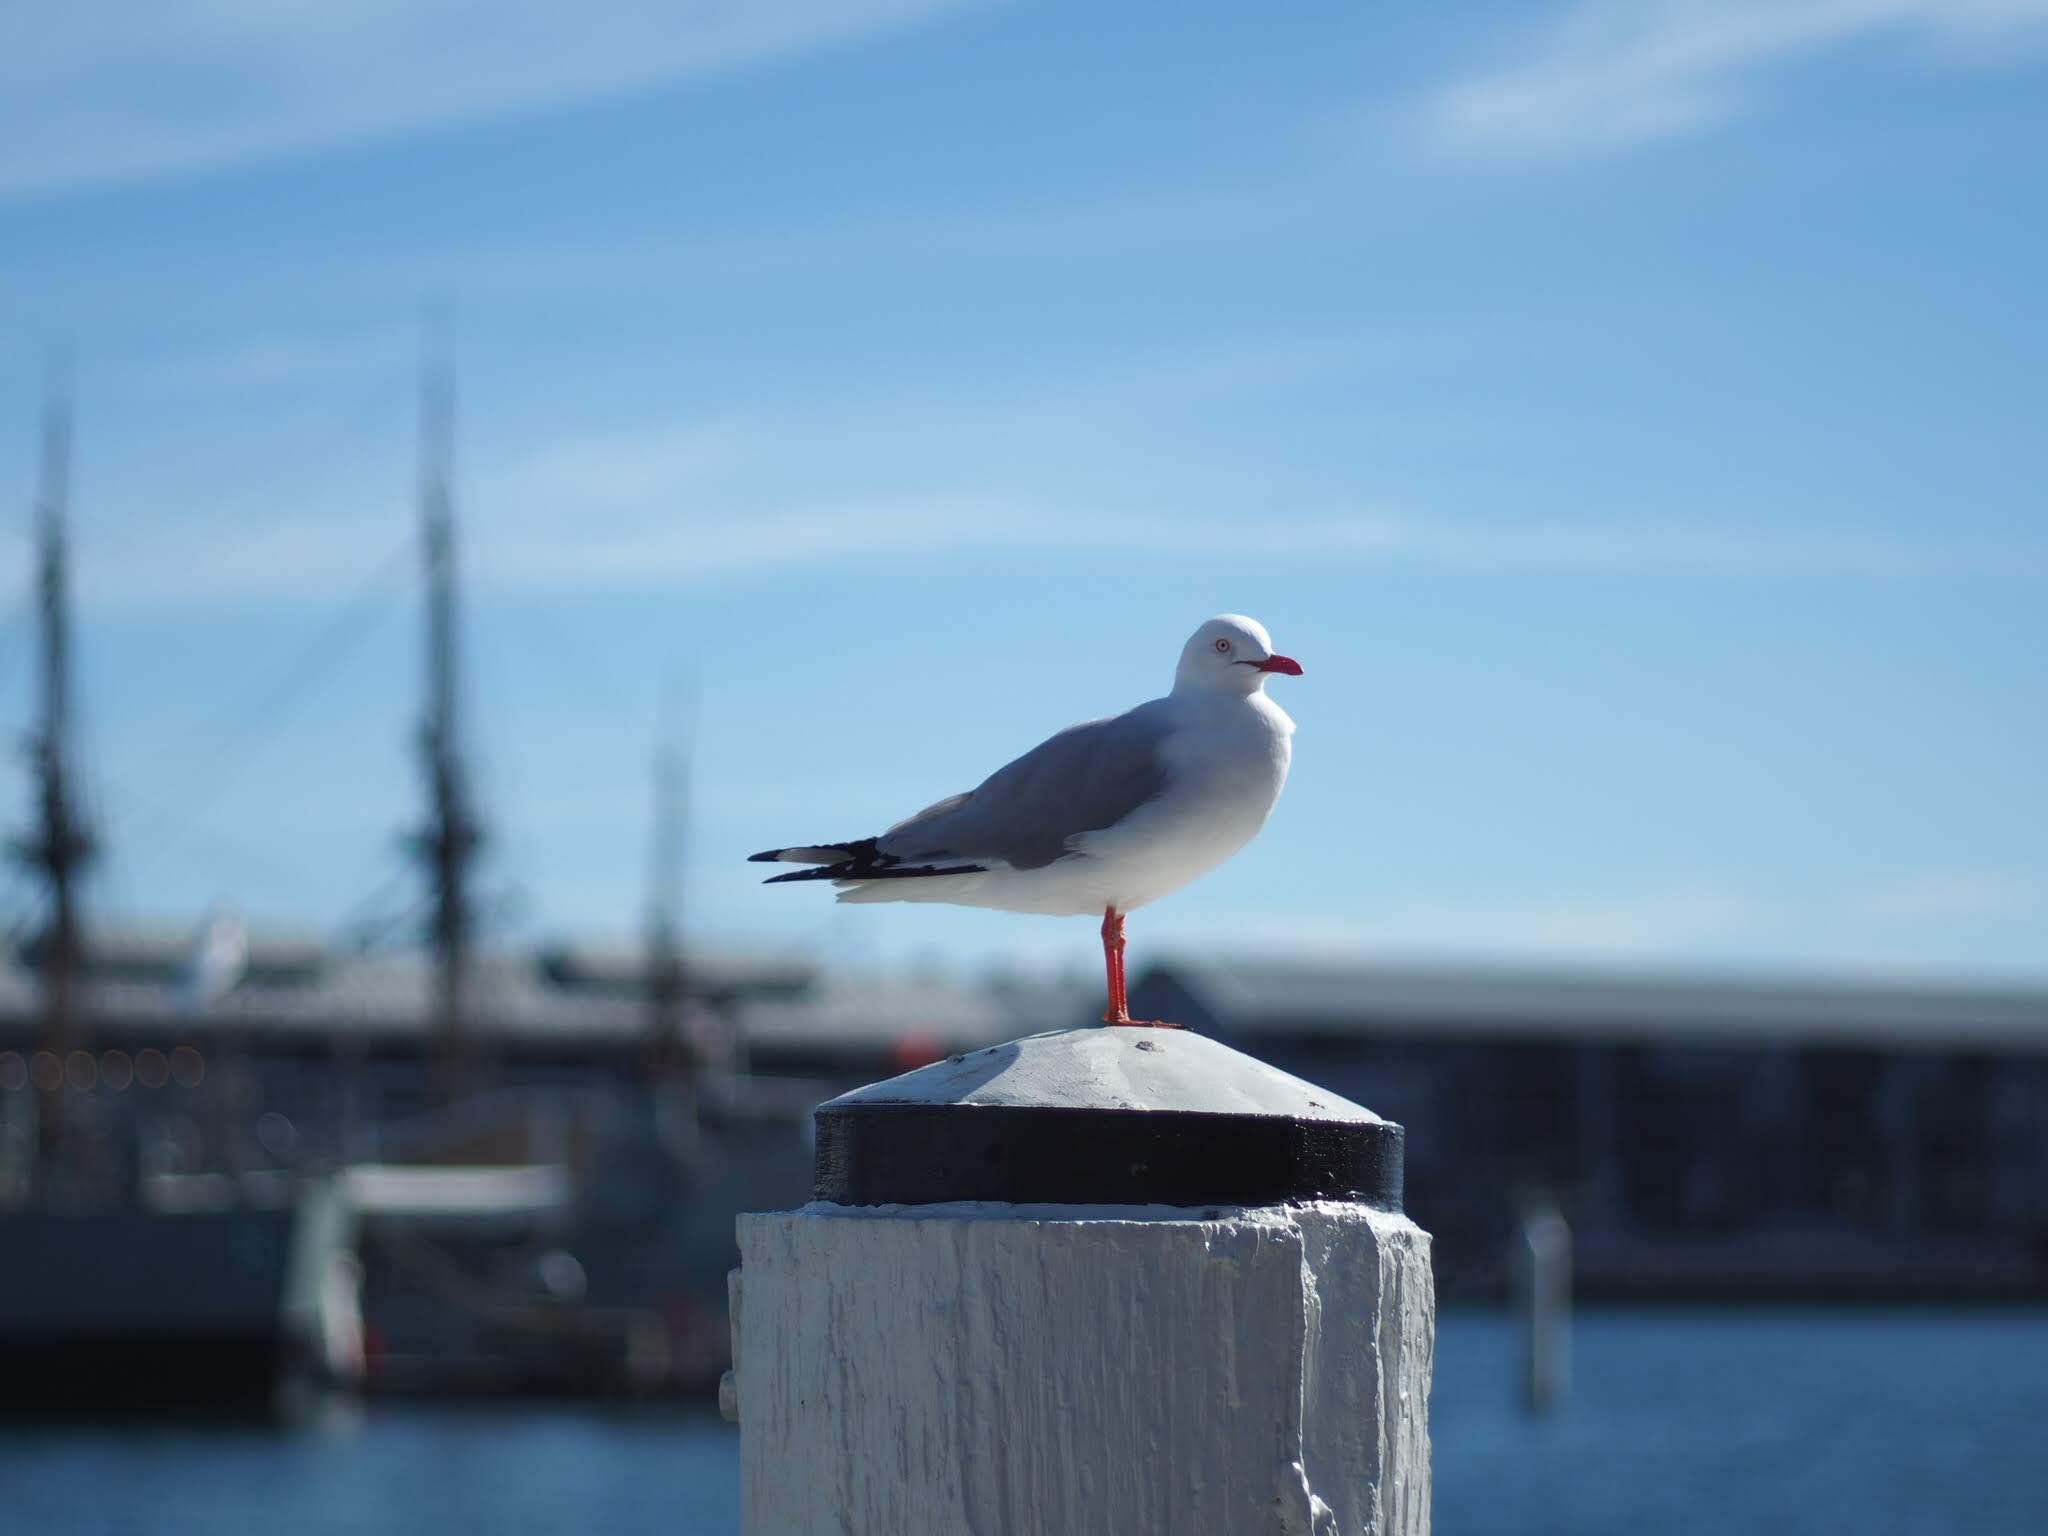 Photo of Silver Gull at シドニー by amachan